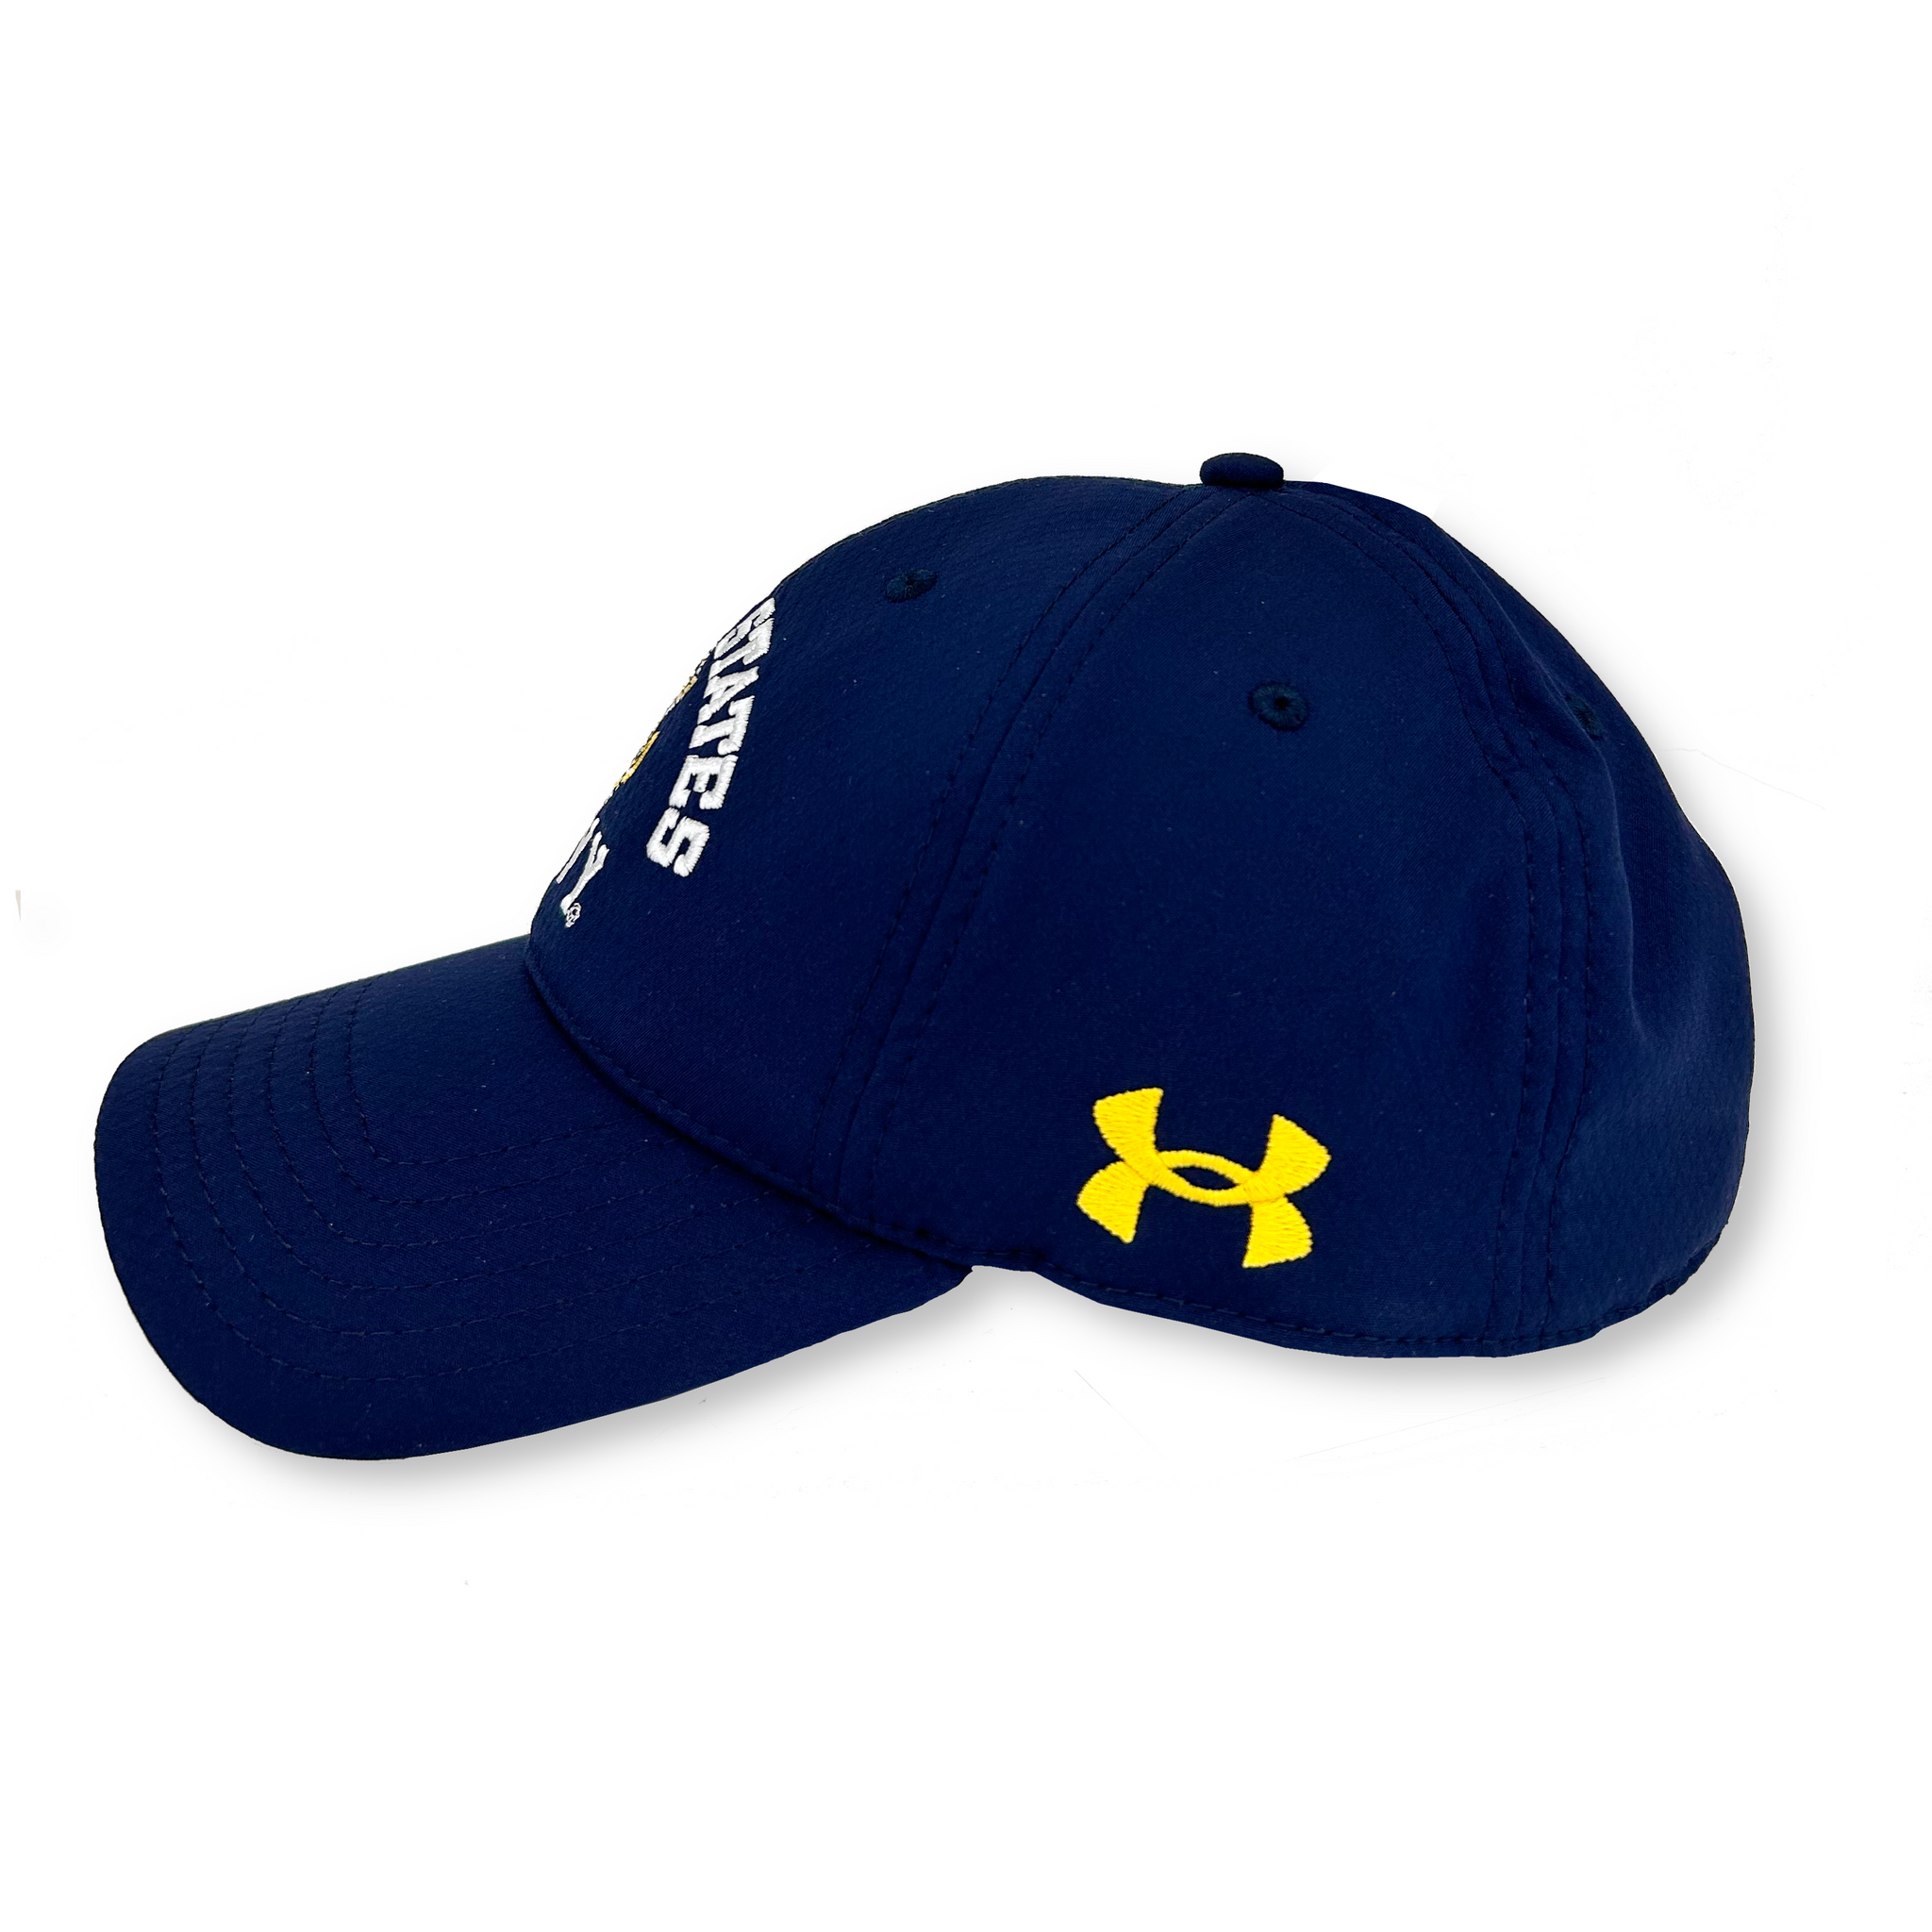 Navy Under Armour Fly Navy Adjustable Hat (Navy)